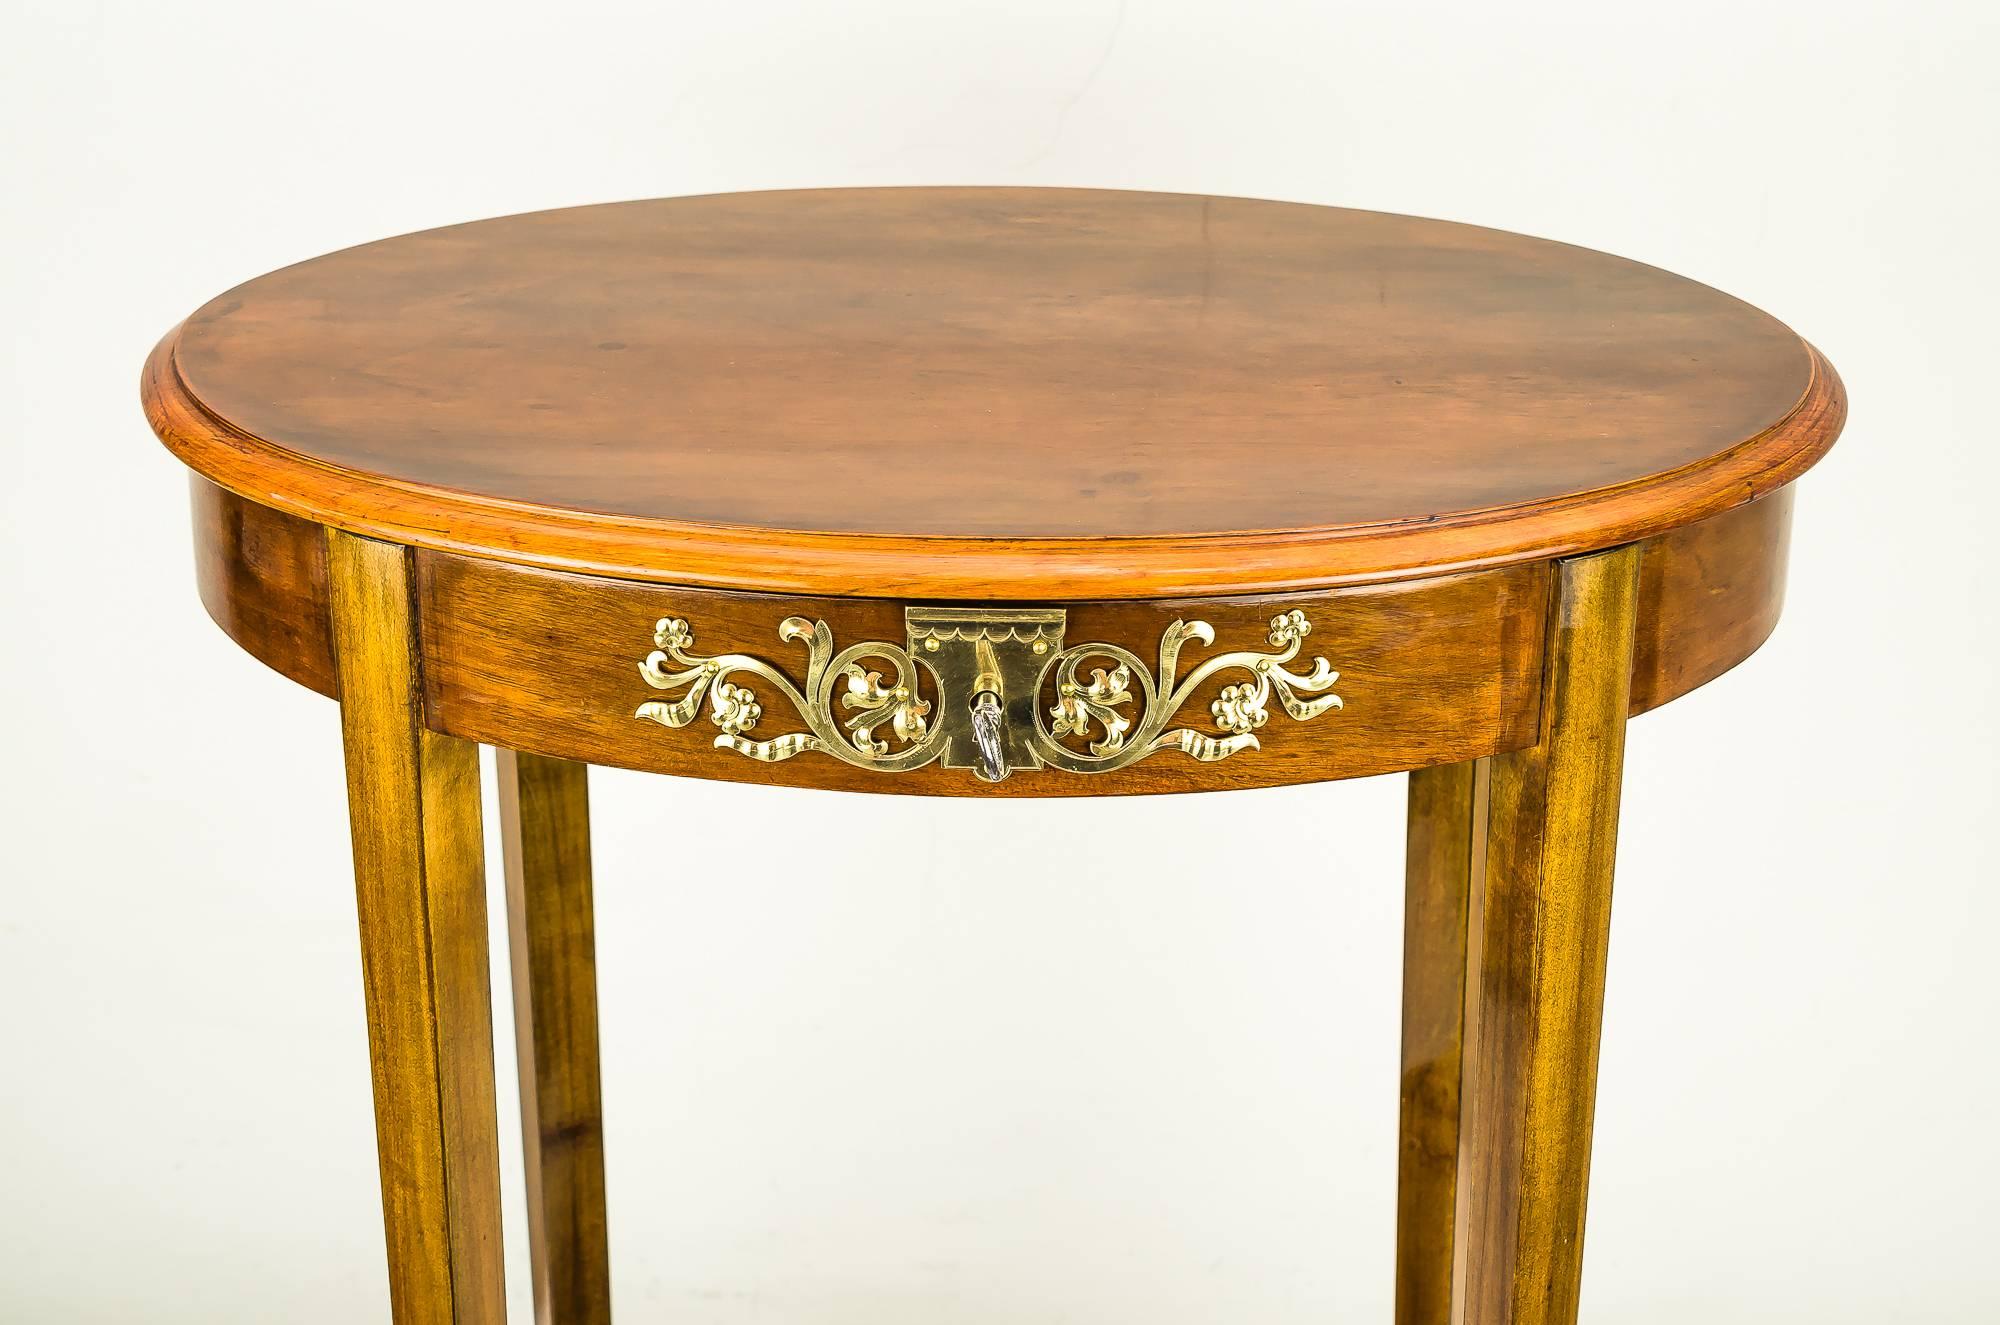 Early 20th Century Art Deco Table Polished Nut Wood, circa 1920